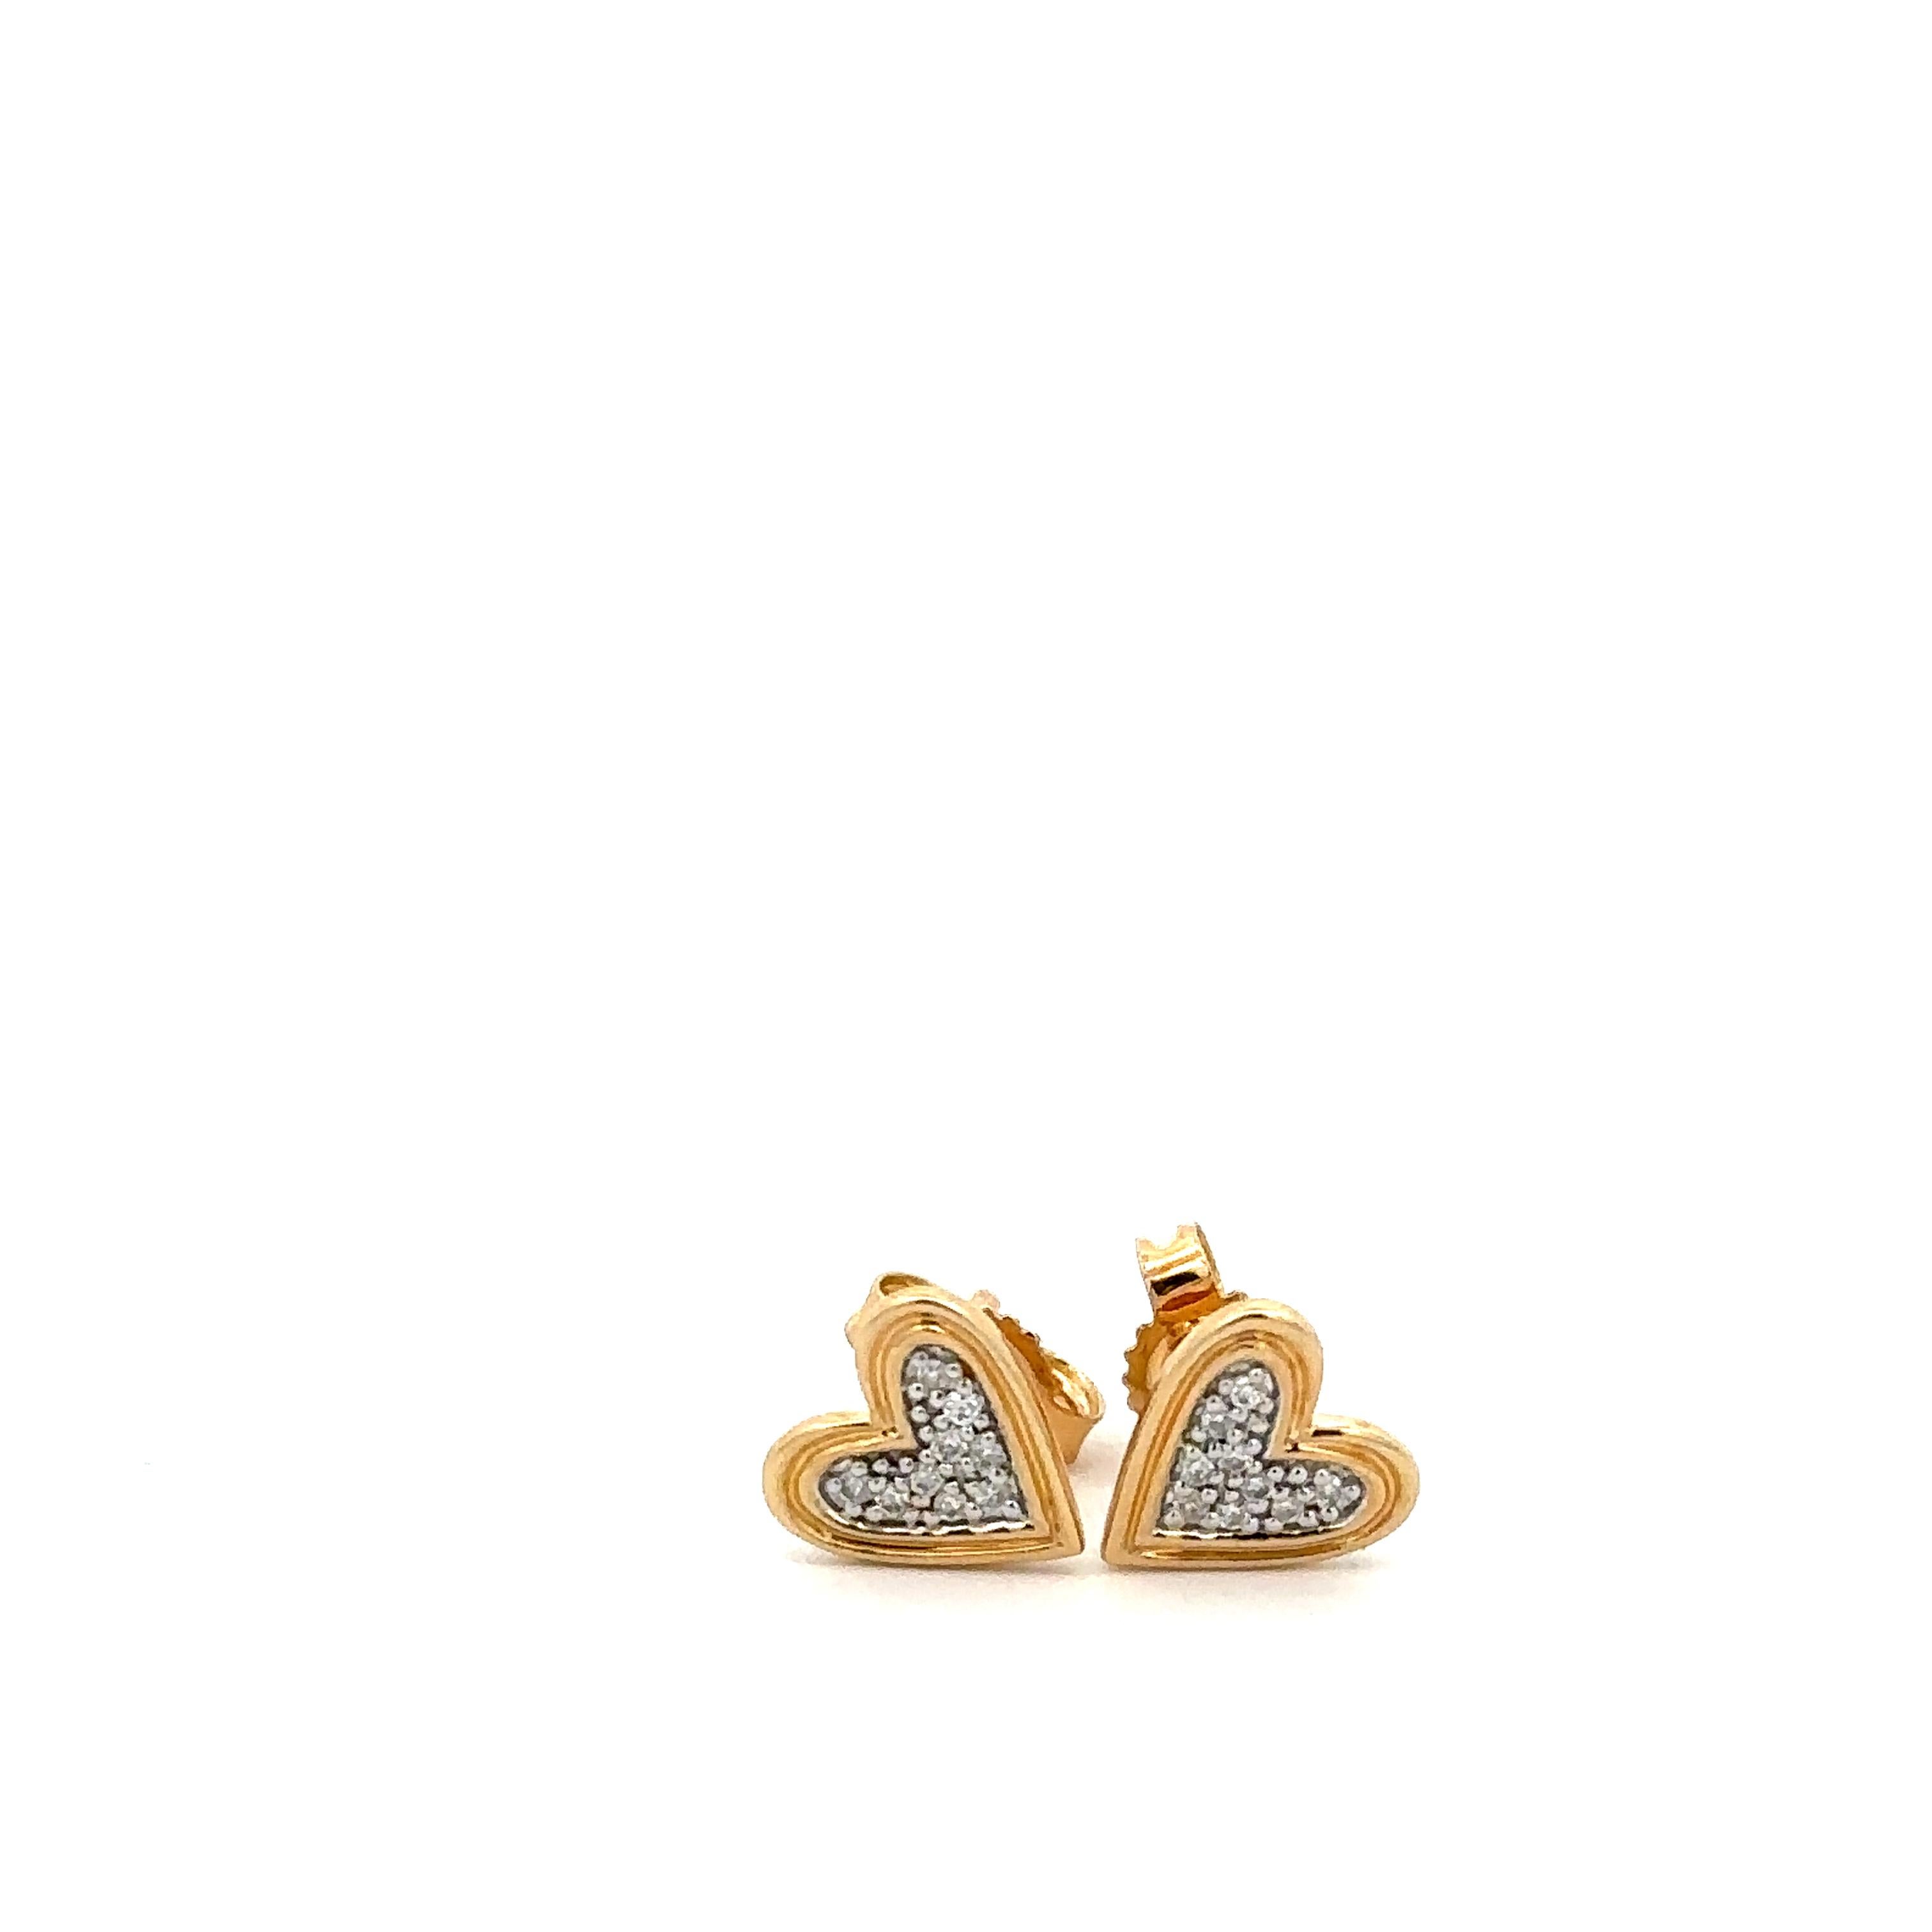 Adina Reyter One of a Kind Large Pave Heart Posts - Y14

14k yellow gold pave diamond heart posts.

Measurements: 7 mm x 7 mm

Total Diamond Carat Weight: 0.10 CT
